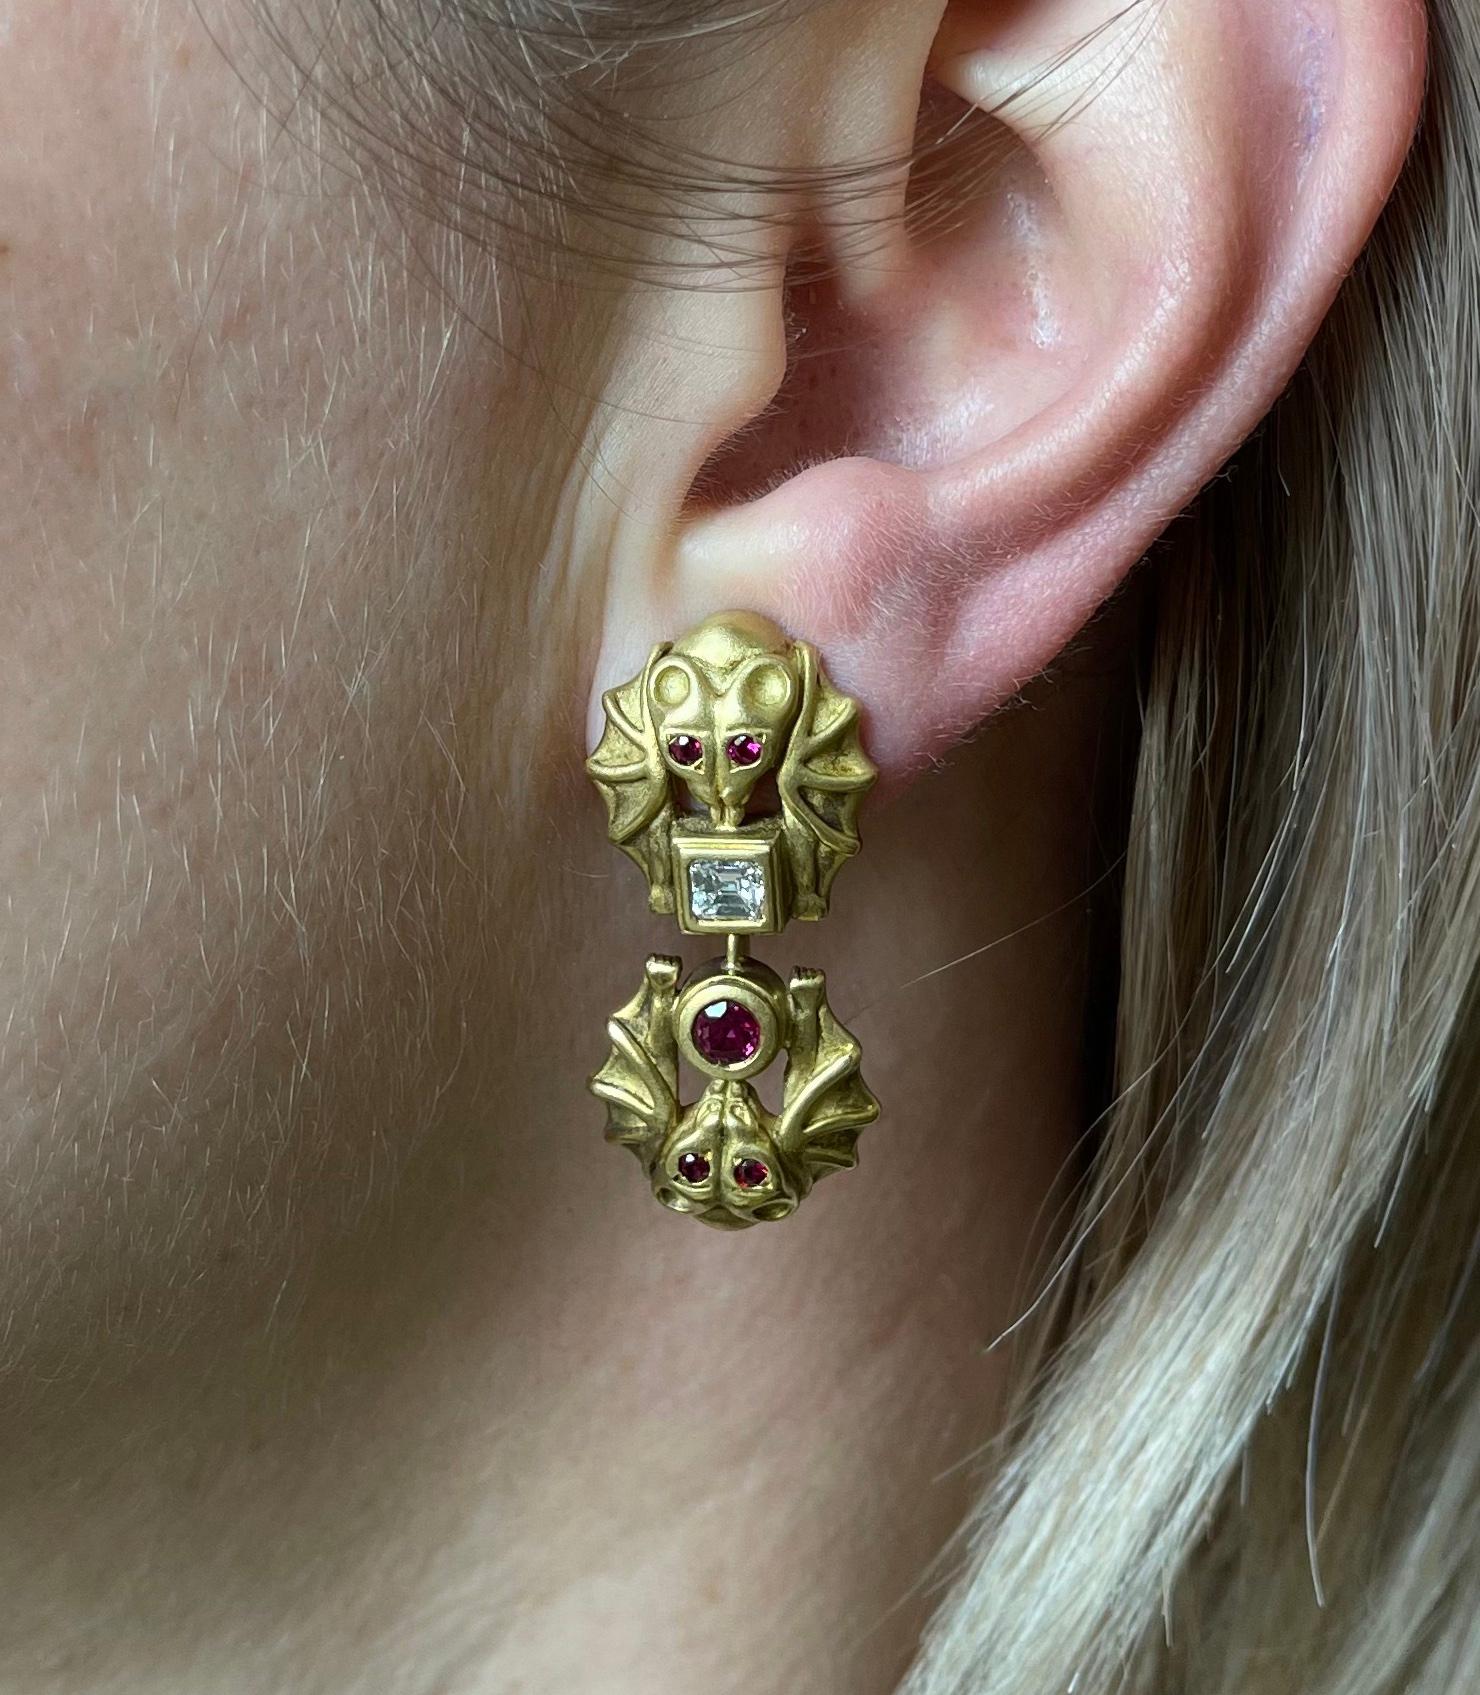 Pair of rare and unique 18k gold earrings, crafted by Barry Kieselstein-Cord, depicting bats, adorned with vibrant rubies and approx. 0.60ctw G/VS diamonds. Earrings have detachable drops, can be worn two ways. Earrings measure 1.5